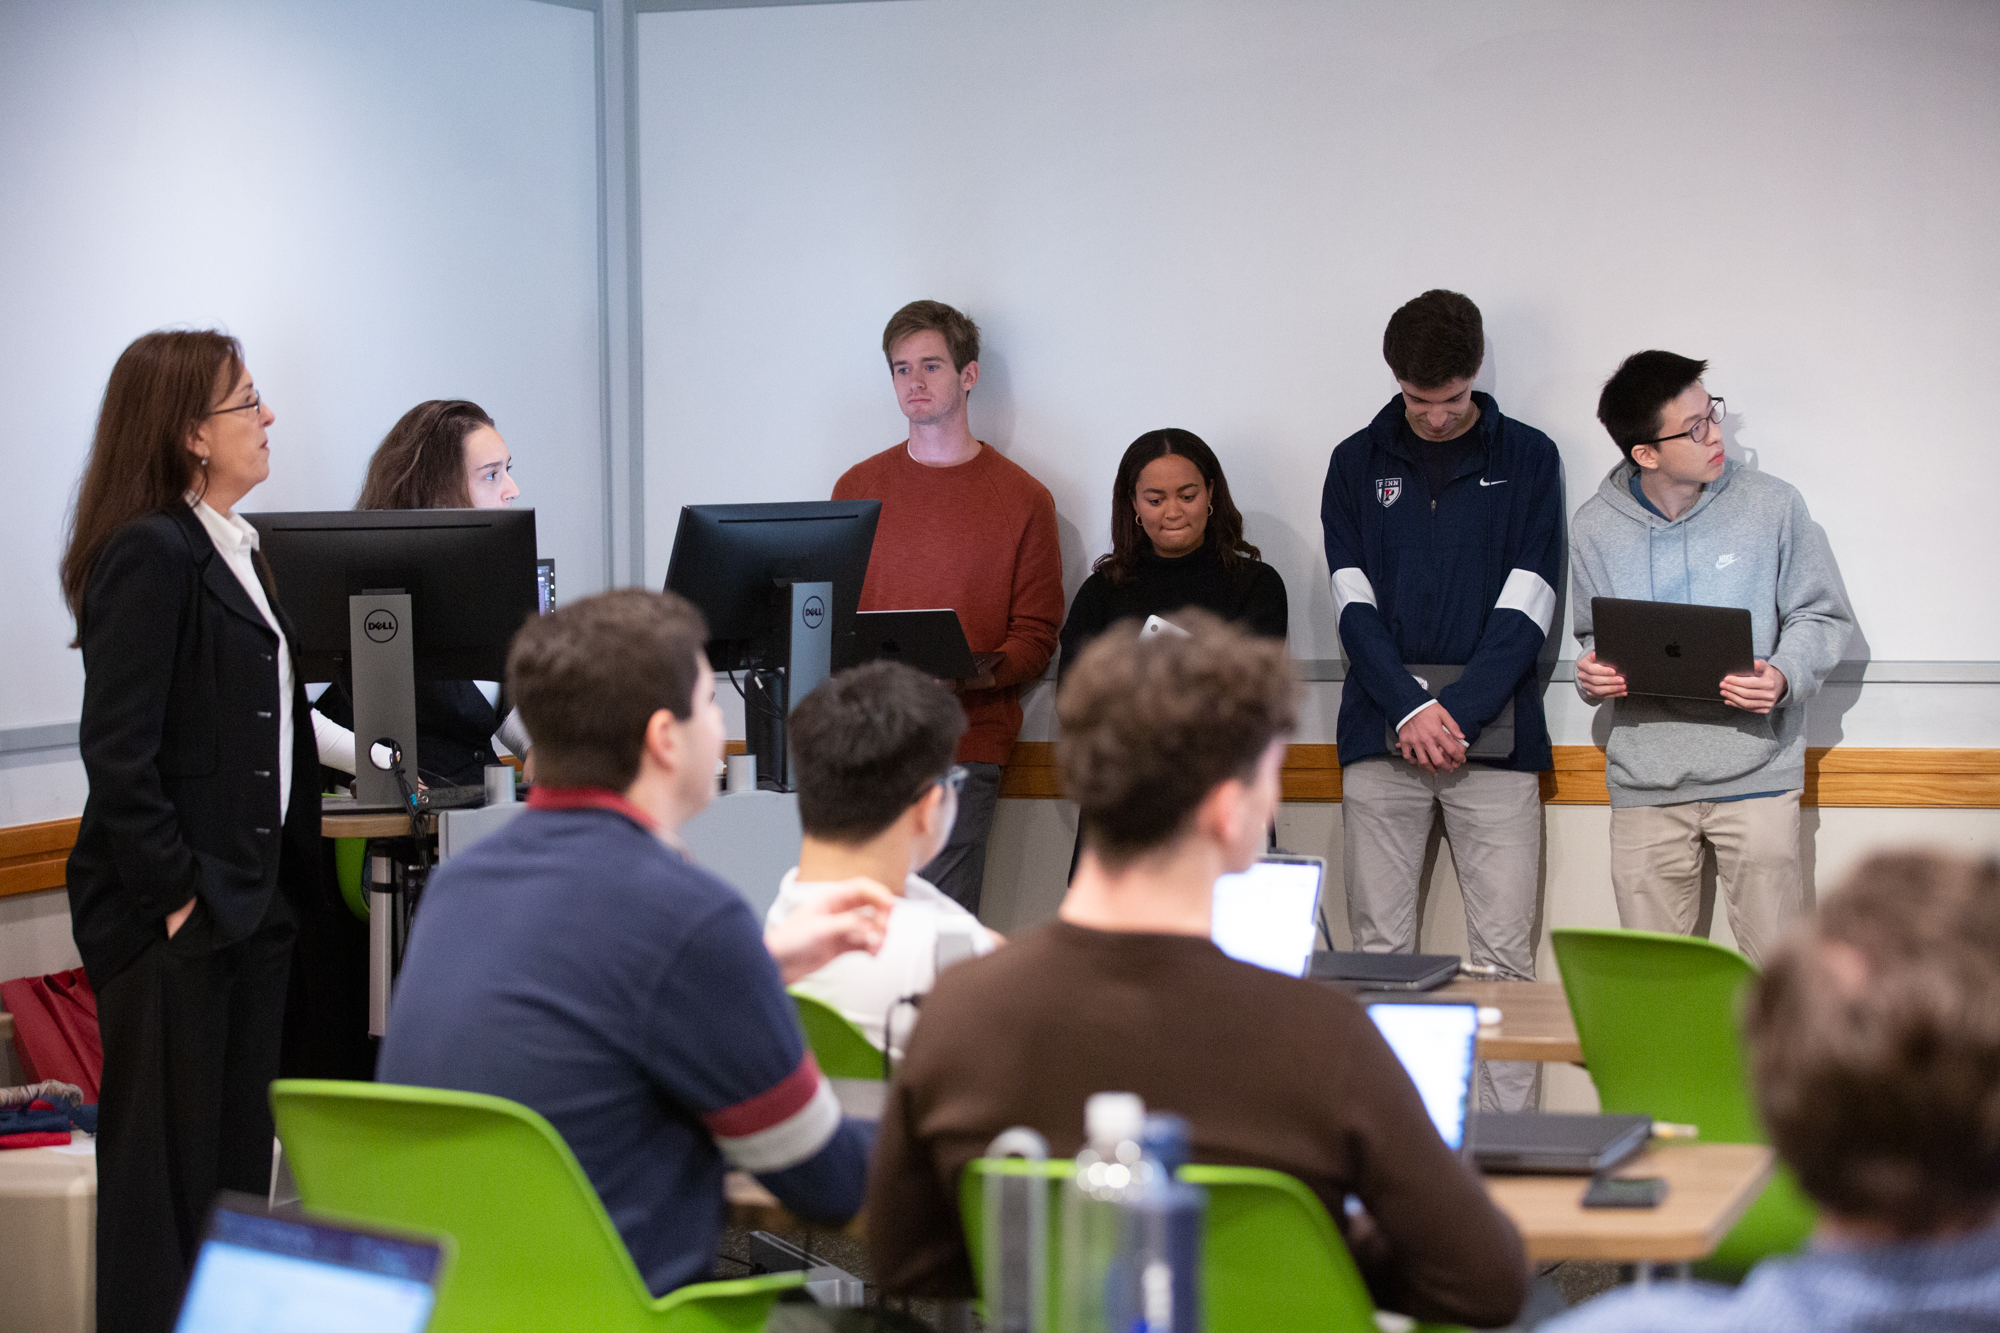 Students stand at the front of a classroom while others sit in seats andawait a debate in the Future of Conservatism class at Penn.